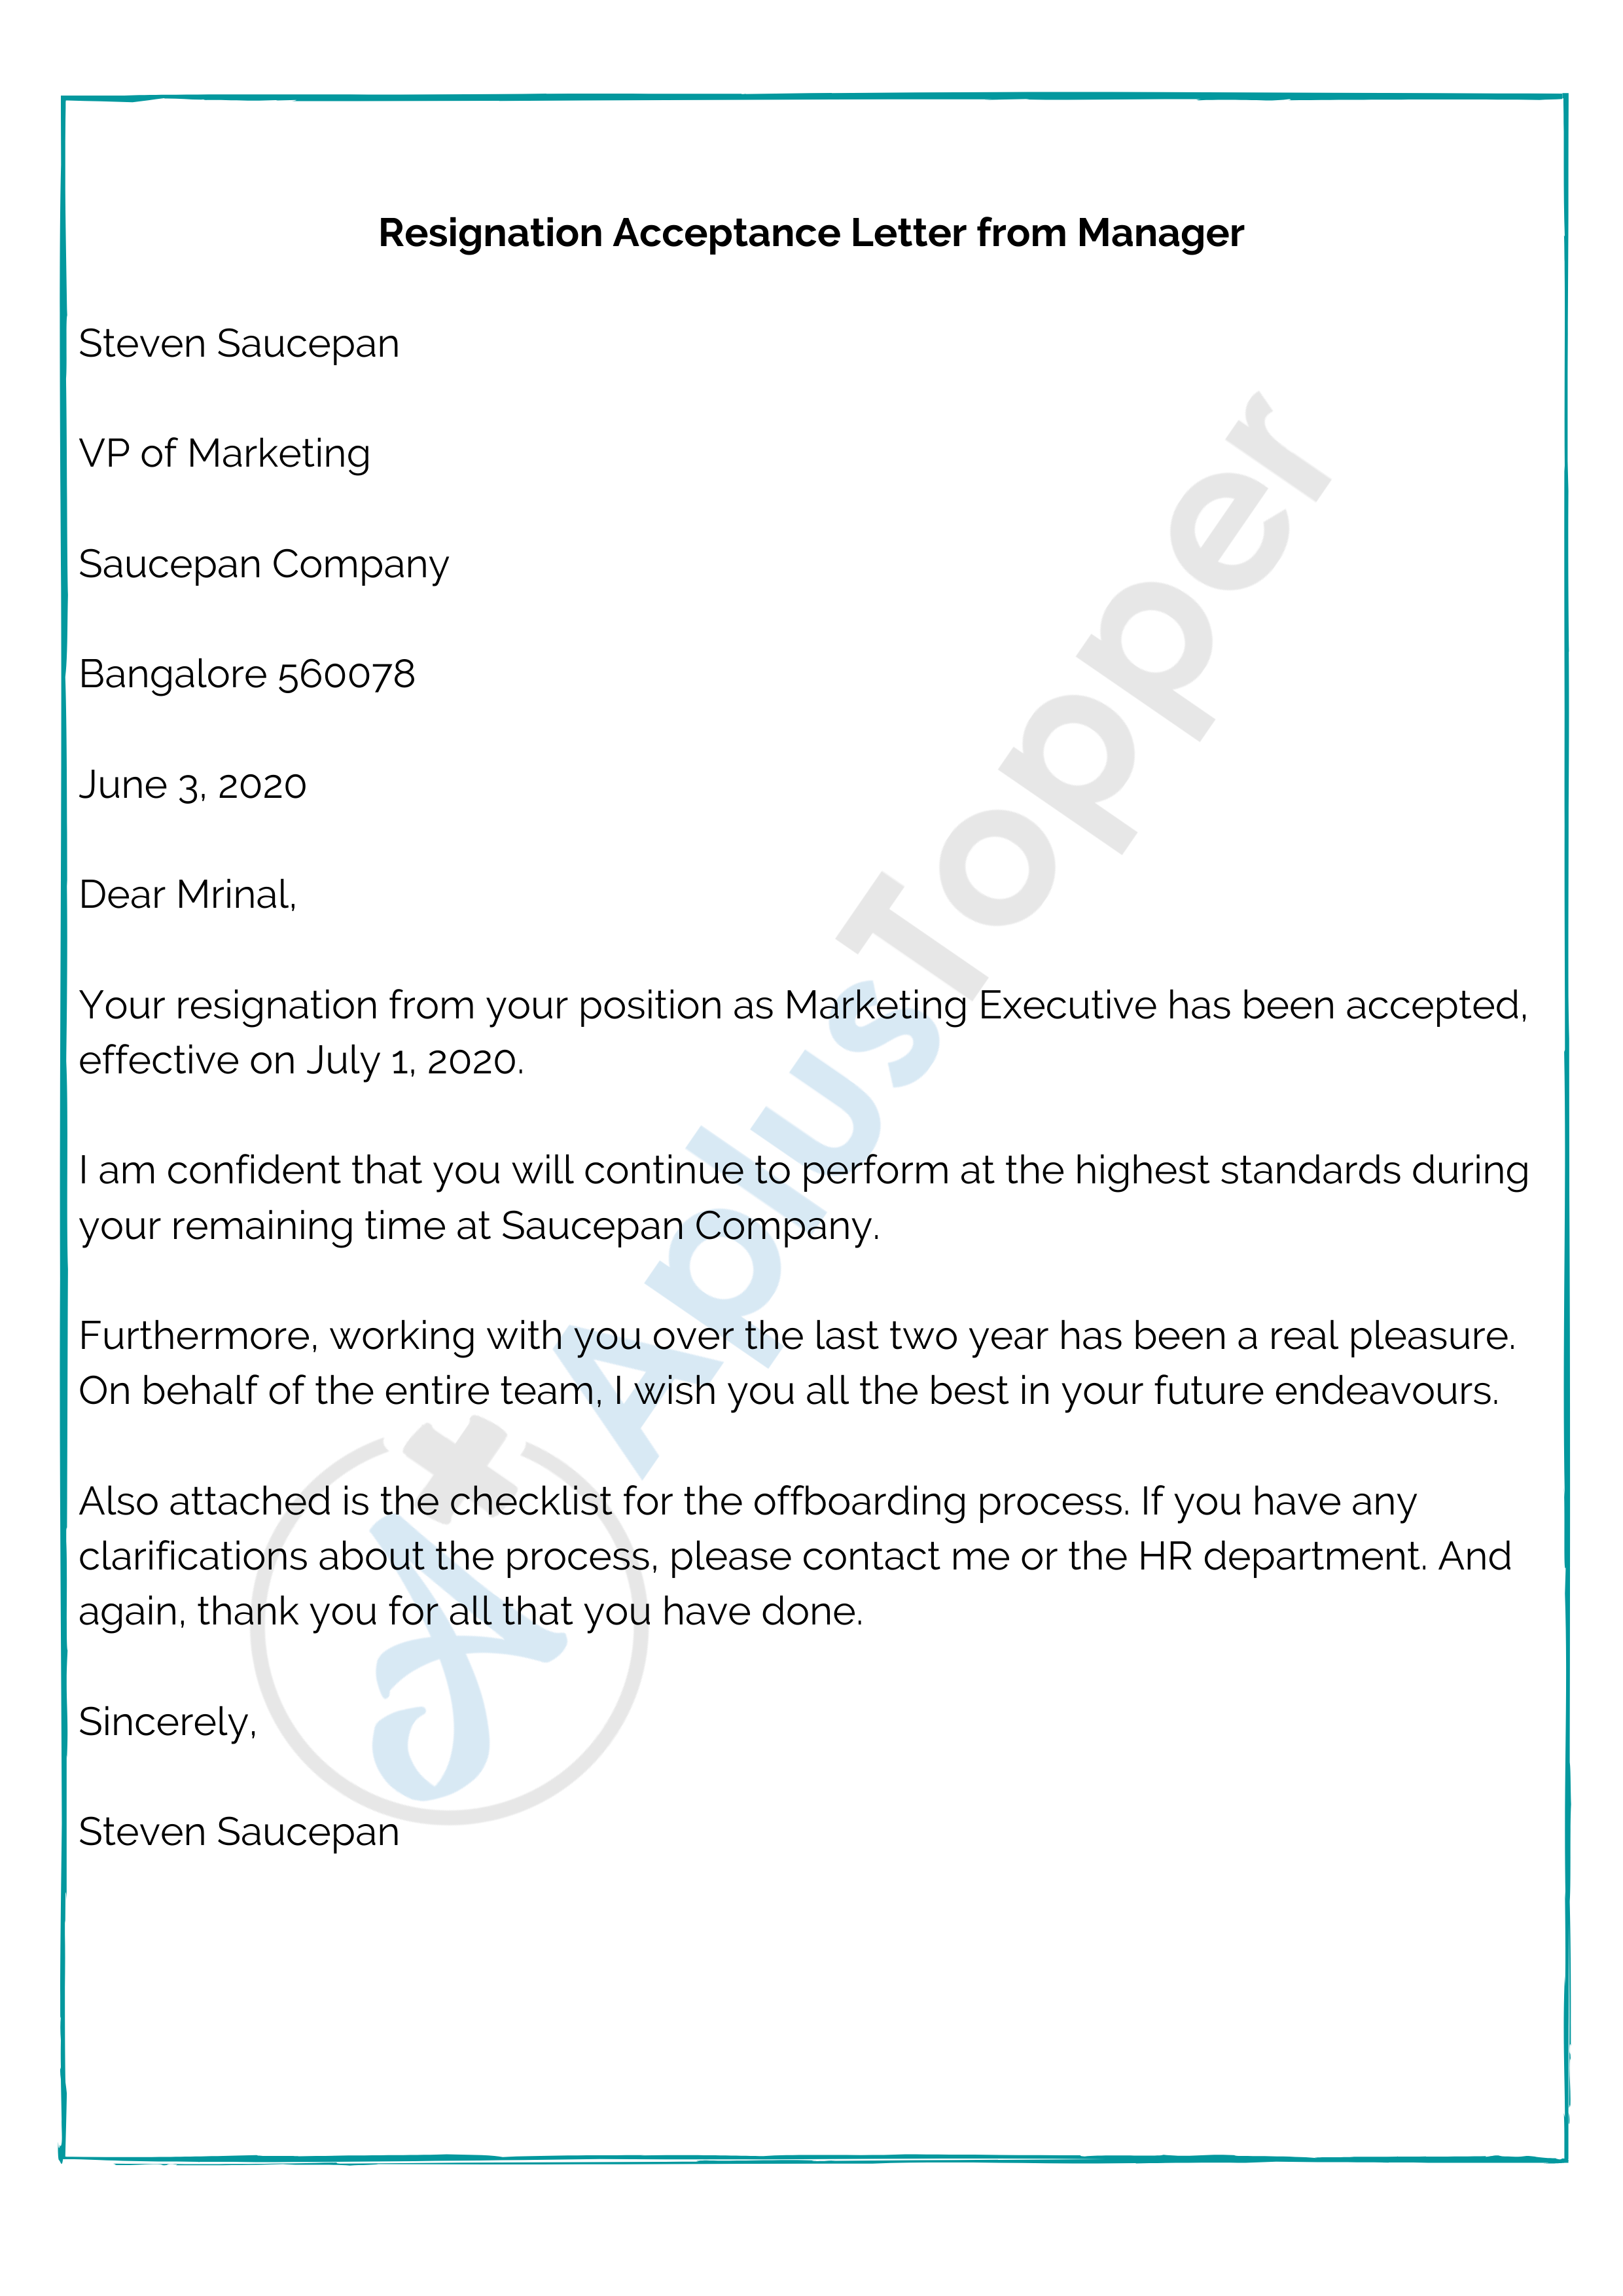 Resignation Acceptance Letter  Samples, Templates, Examples, How